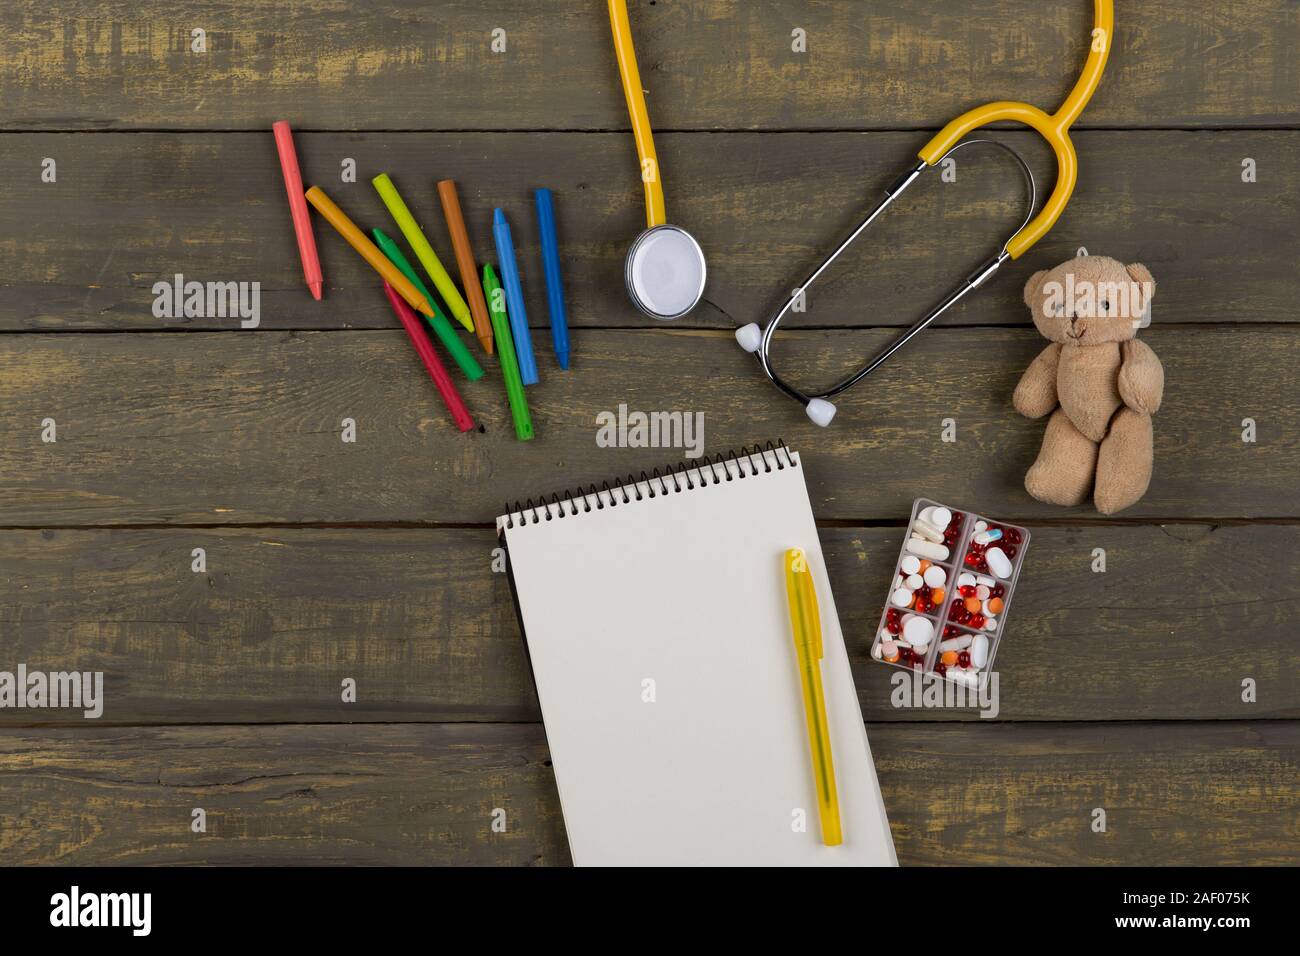 Children's doctor or pediatrician concept - blank notepad, pills, yellow stethoscope, Teddy bear toy, crayons on wooden background. Top view Stock Photo